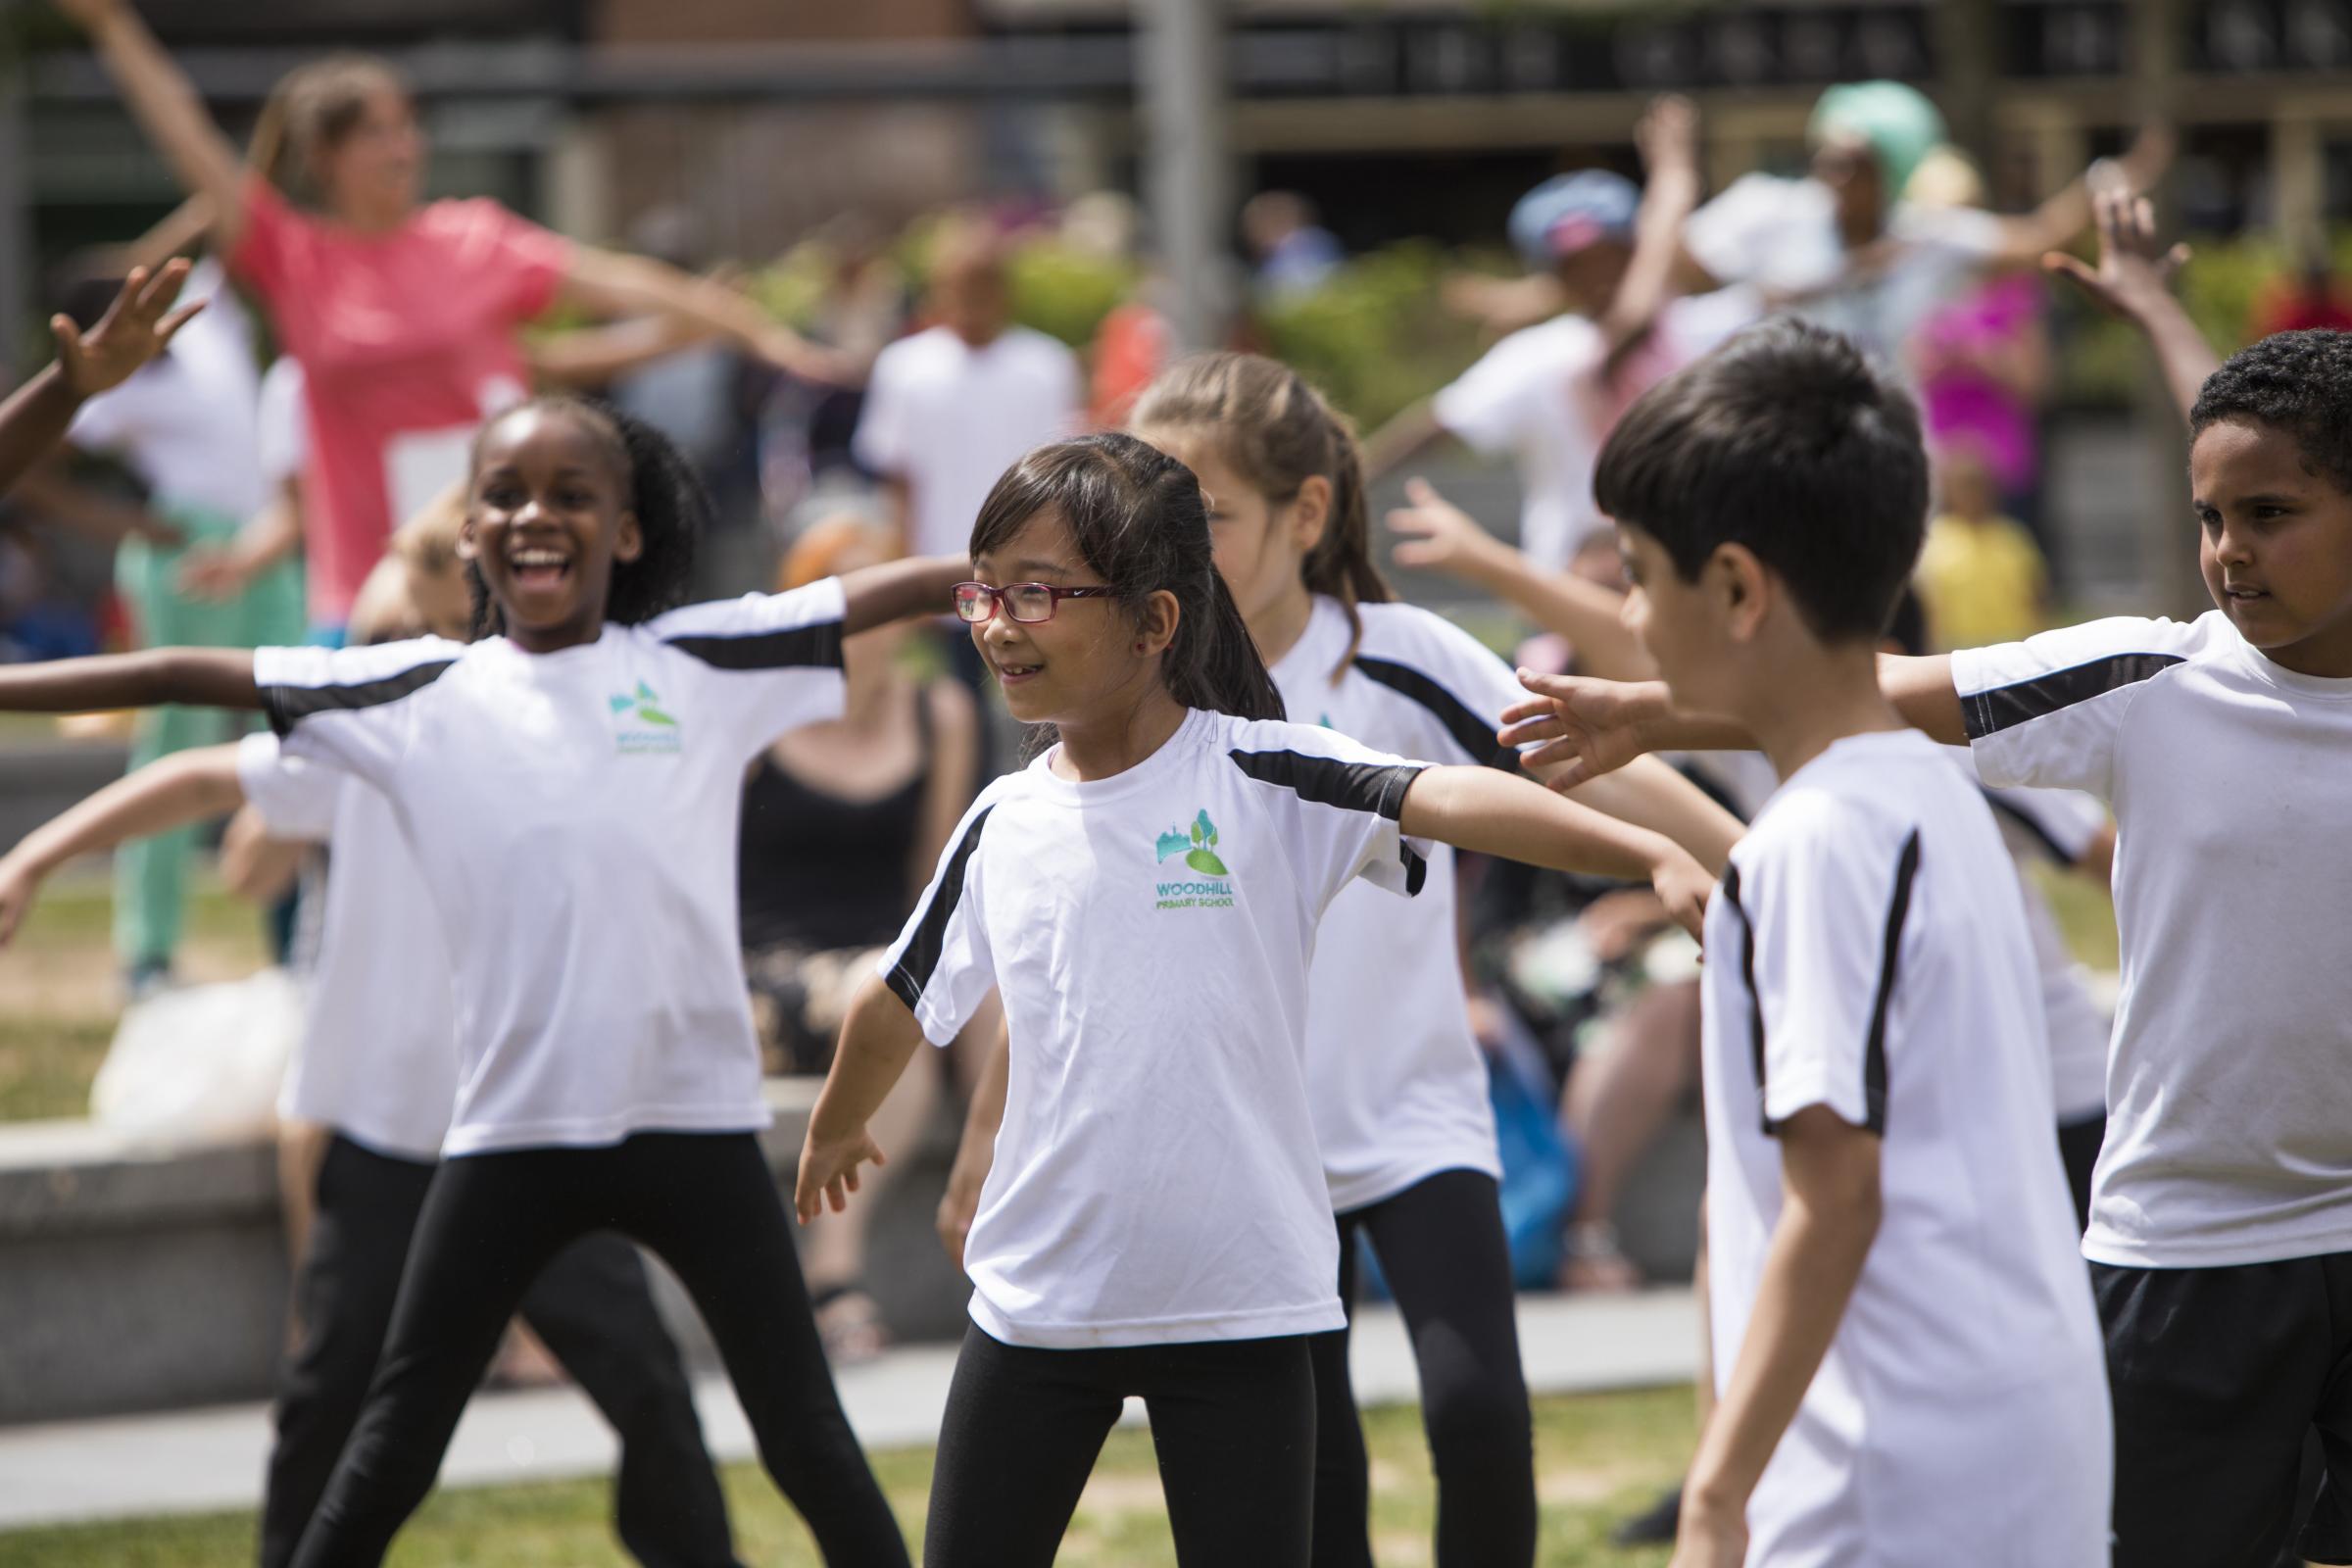 Woolwich moves to the rhythm as dance festival enters town